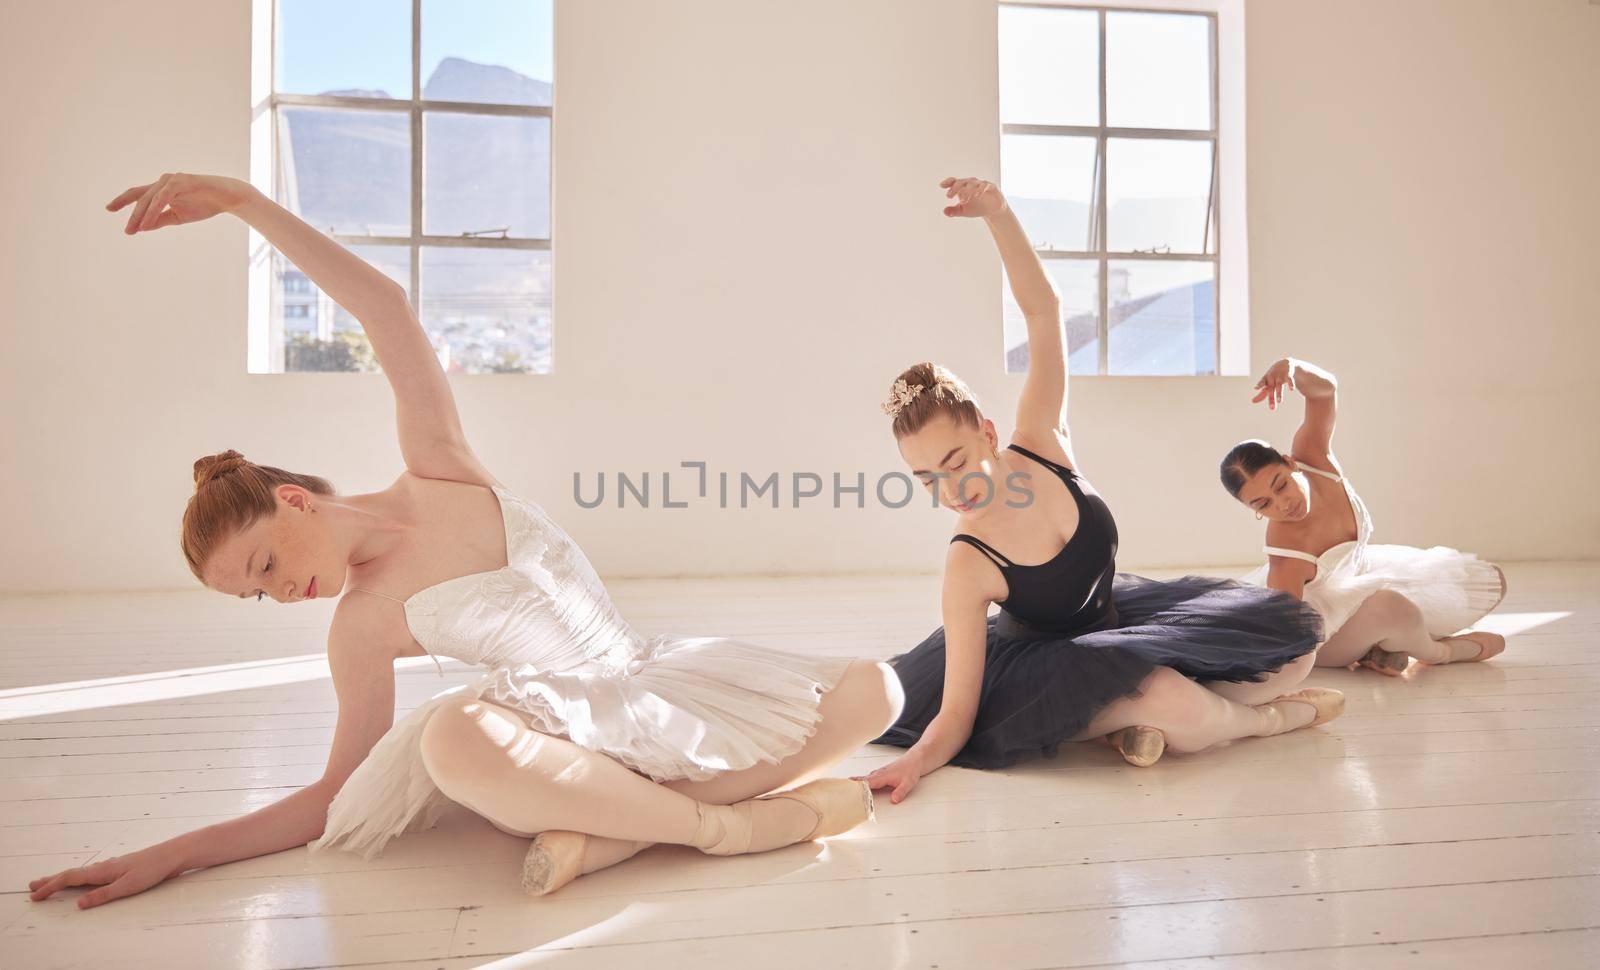 Ballet team training, exercise and dance in theater, studio or stage for competition, production or recital. Teamwork or collaboration of creative beauty performance at dancing event or concert by YuriArcurs